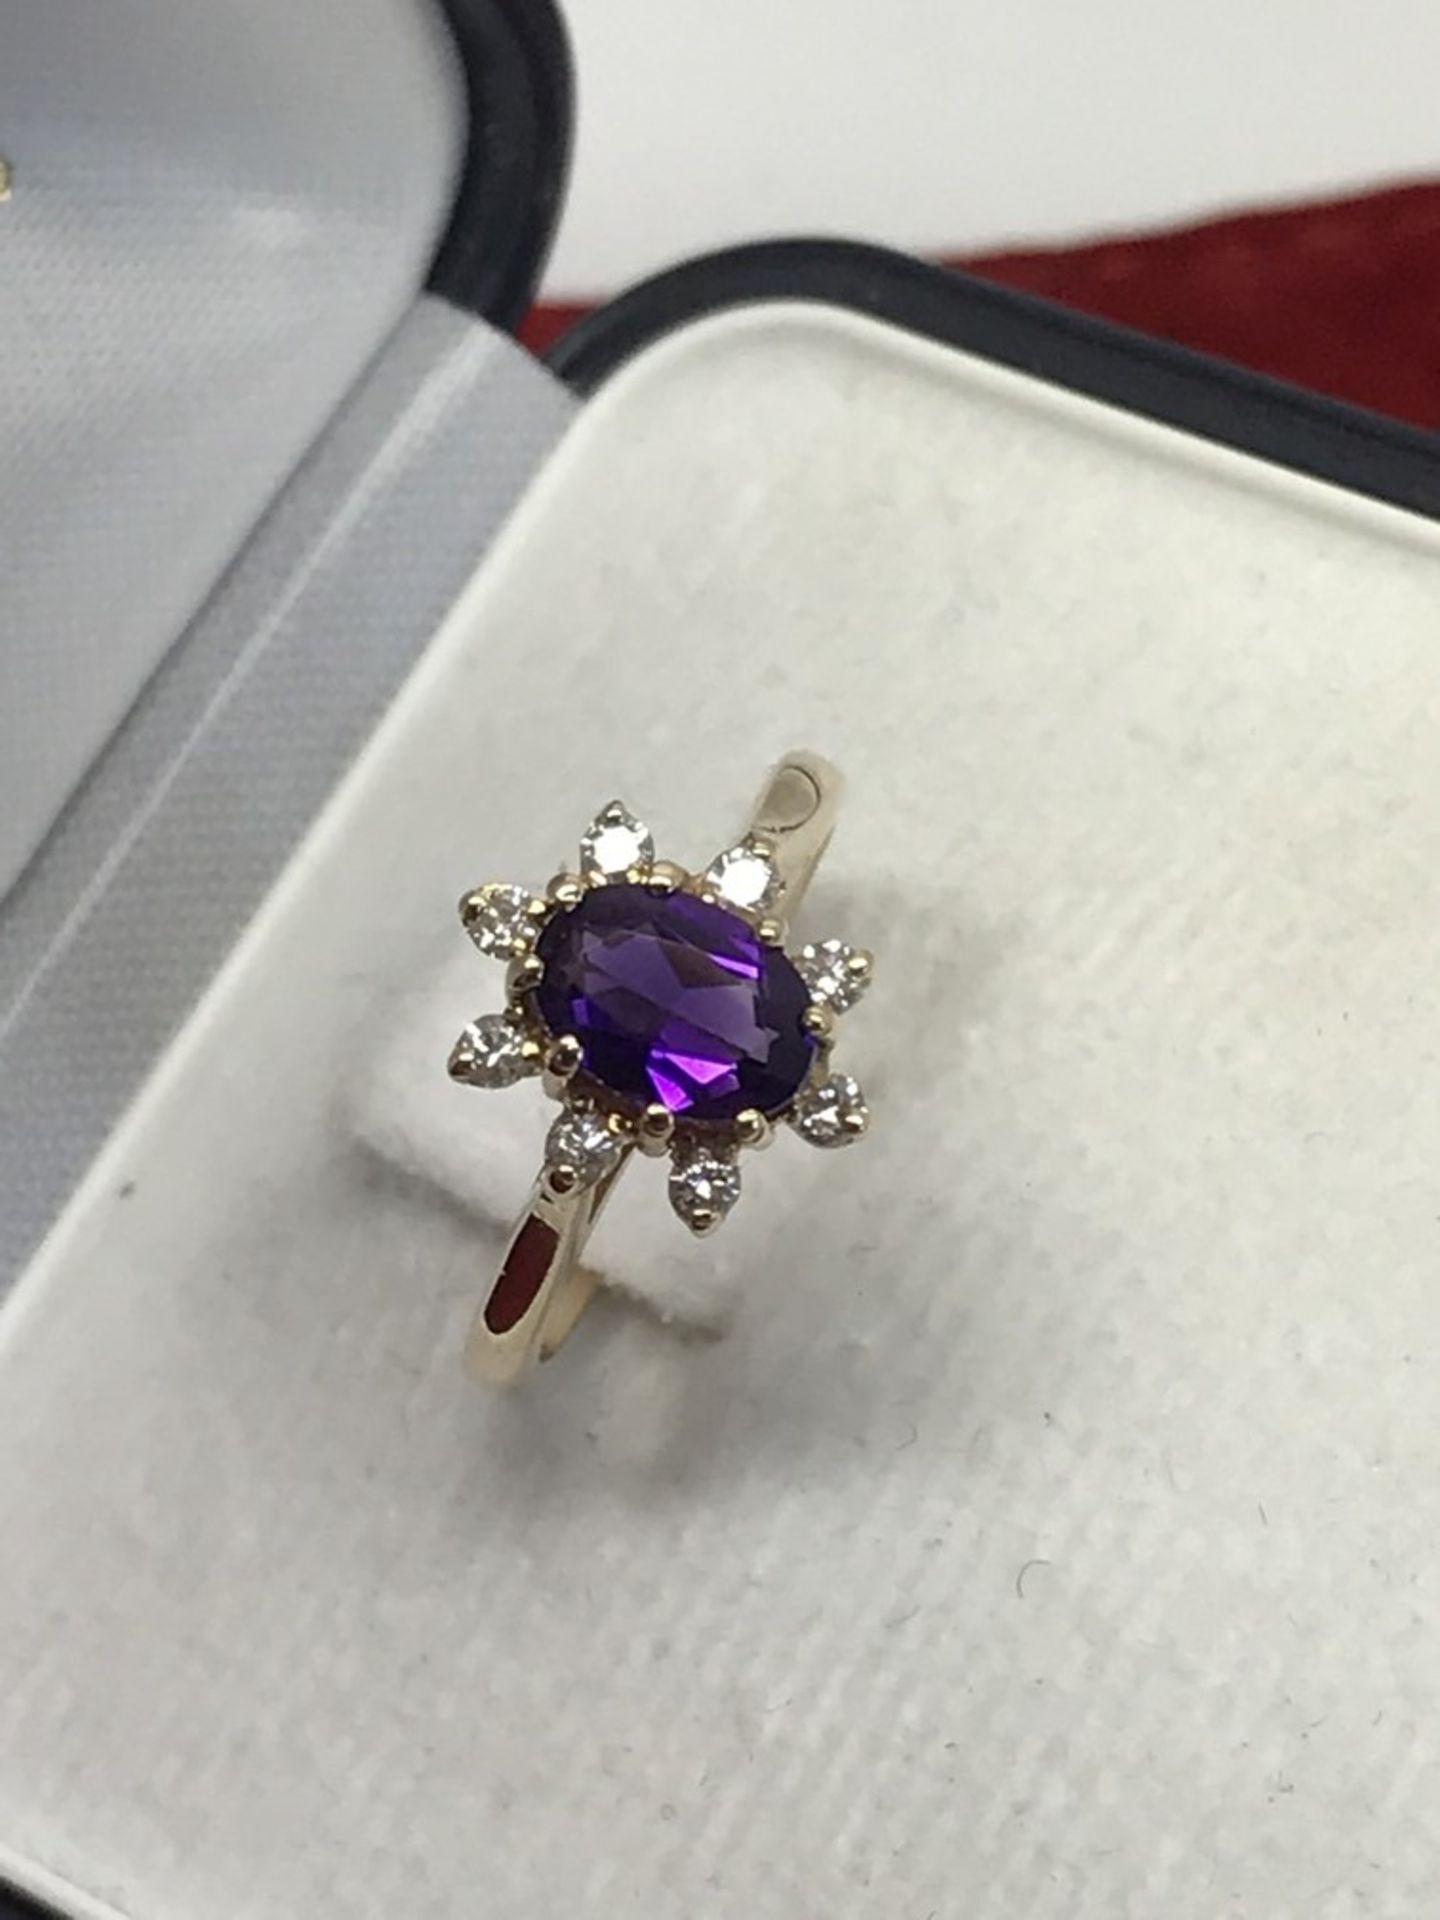 AMETHYST & DIAMOND RING SET IN YELLOW METAL TESTED AS 14ct GOLD - Image 2 of 2